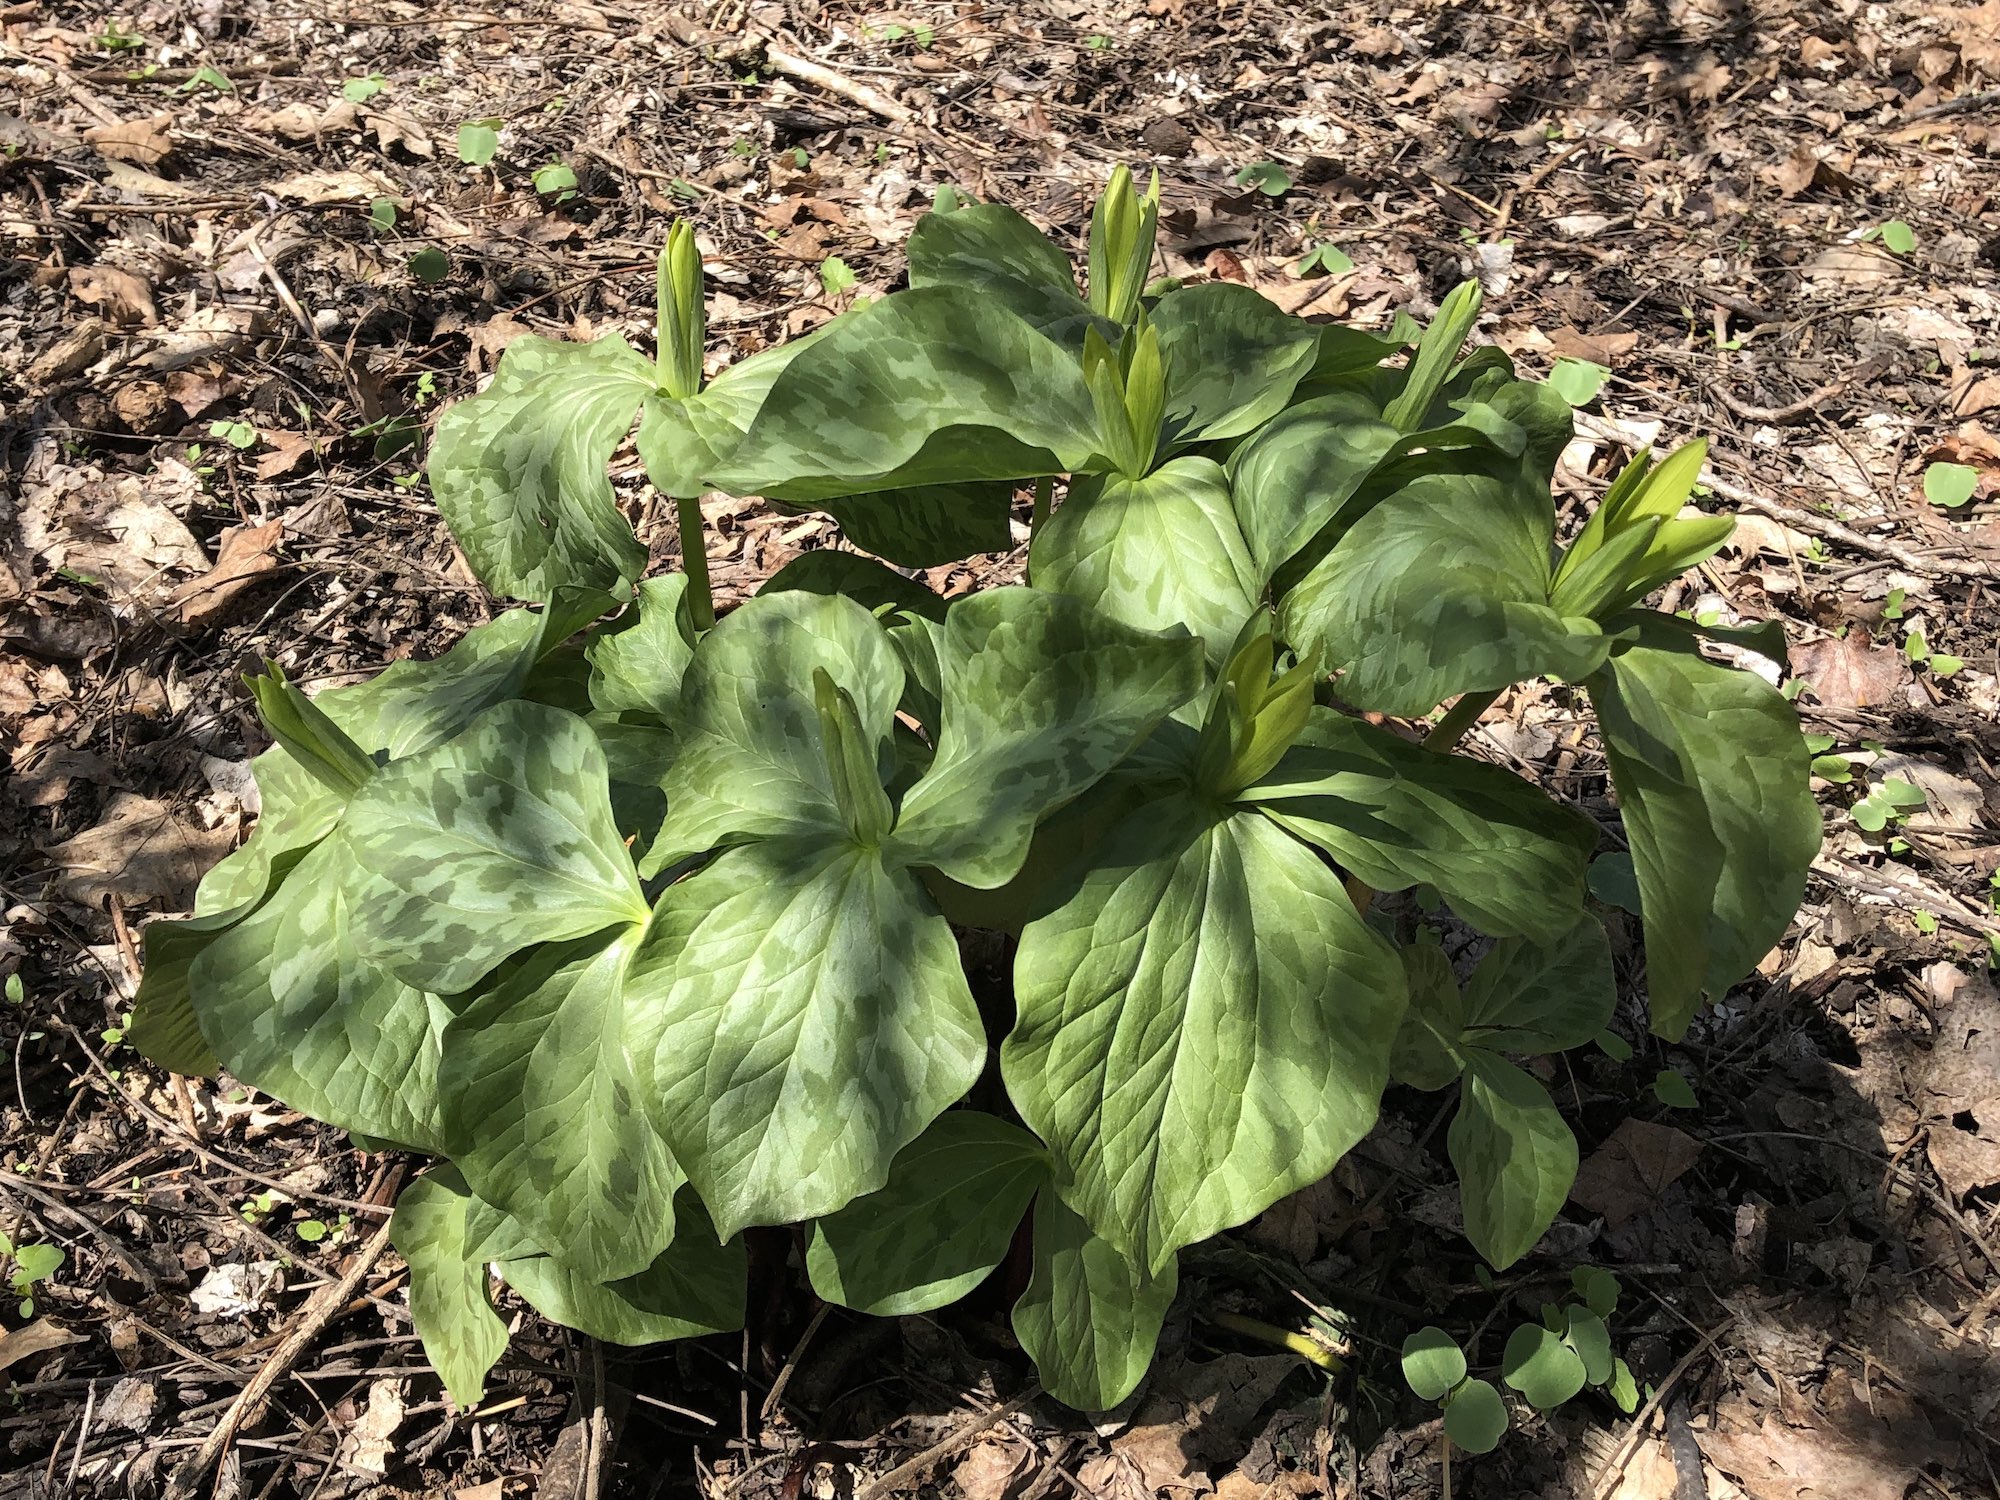 Yellow Trillium off of bike path between Marion Dunn and Duck Pond on April 24, 2019.